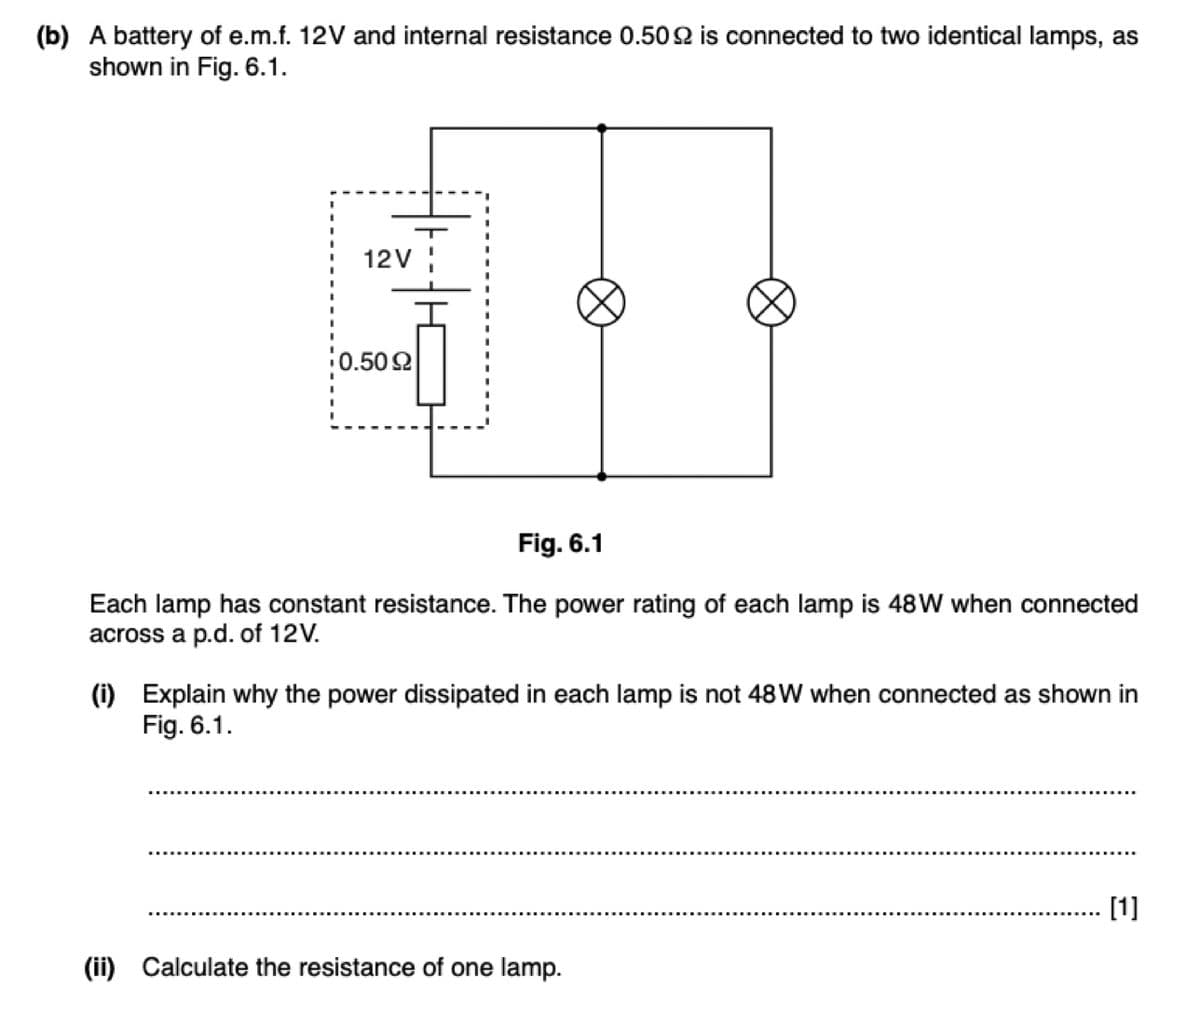 (b) A battery of e.m.f. 12V and internal resistance 0.50 2 is connected to two identical lamps, as
shown in Fig. 6.1.
12V
0.502
Fig. 6.1
Each lamp has constant resistance. The power rating of each lamp is 48W when connected
across a p.d. of 12V.
(i) Explain why the power dissipated in each lamp is not 48W when connected as shown in
Fig. 6.1.
[1]
(ii) Calculate the resistance of one lamp.
